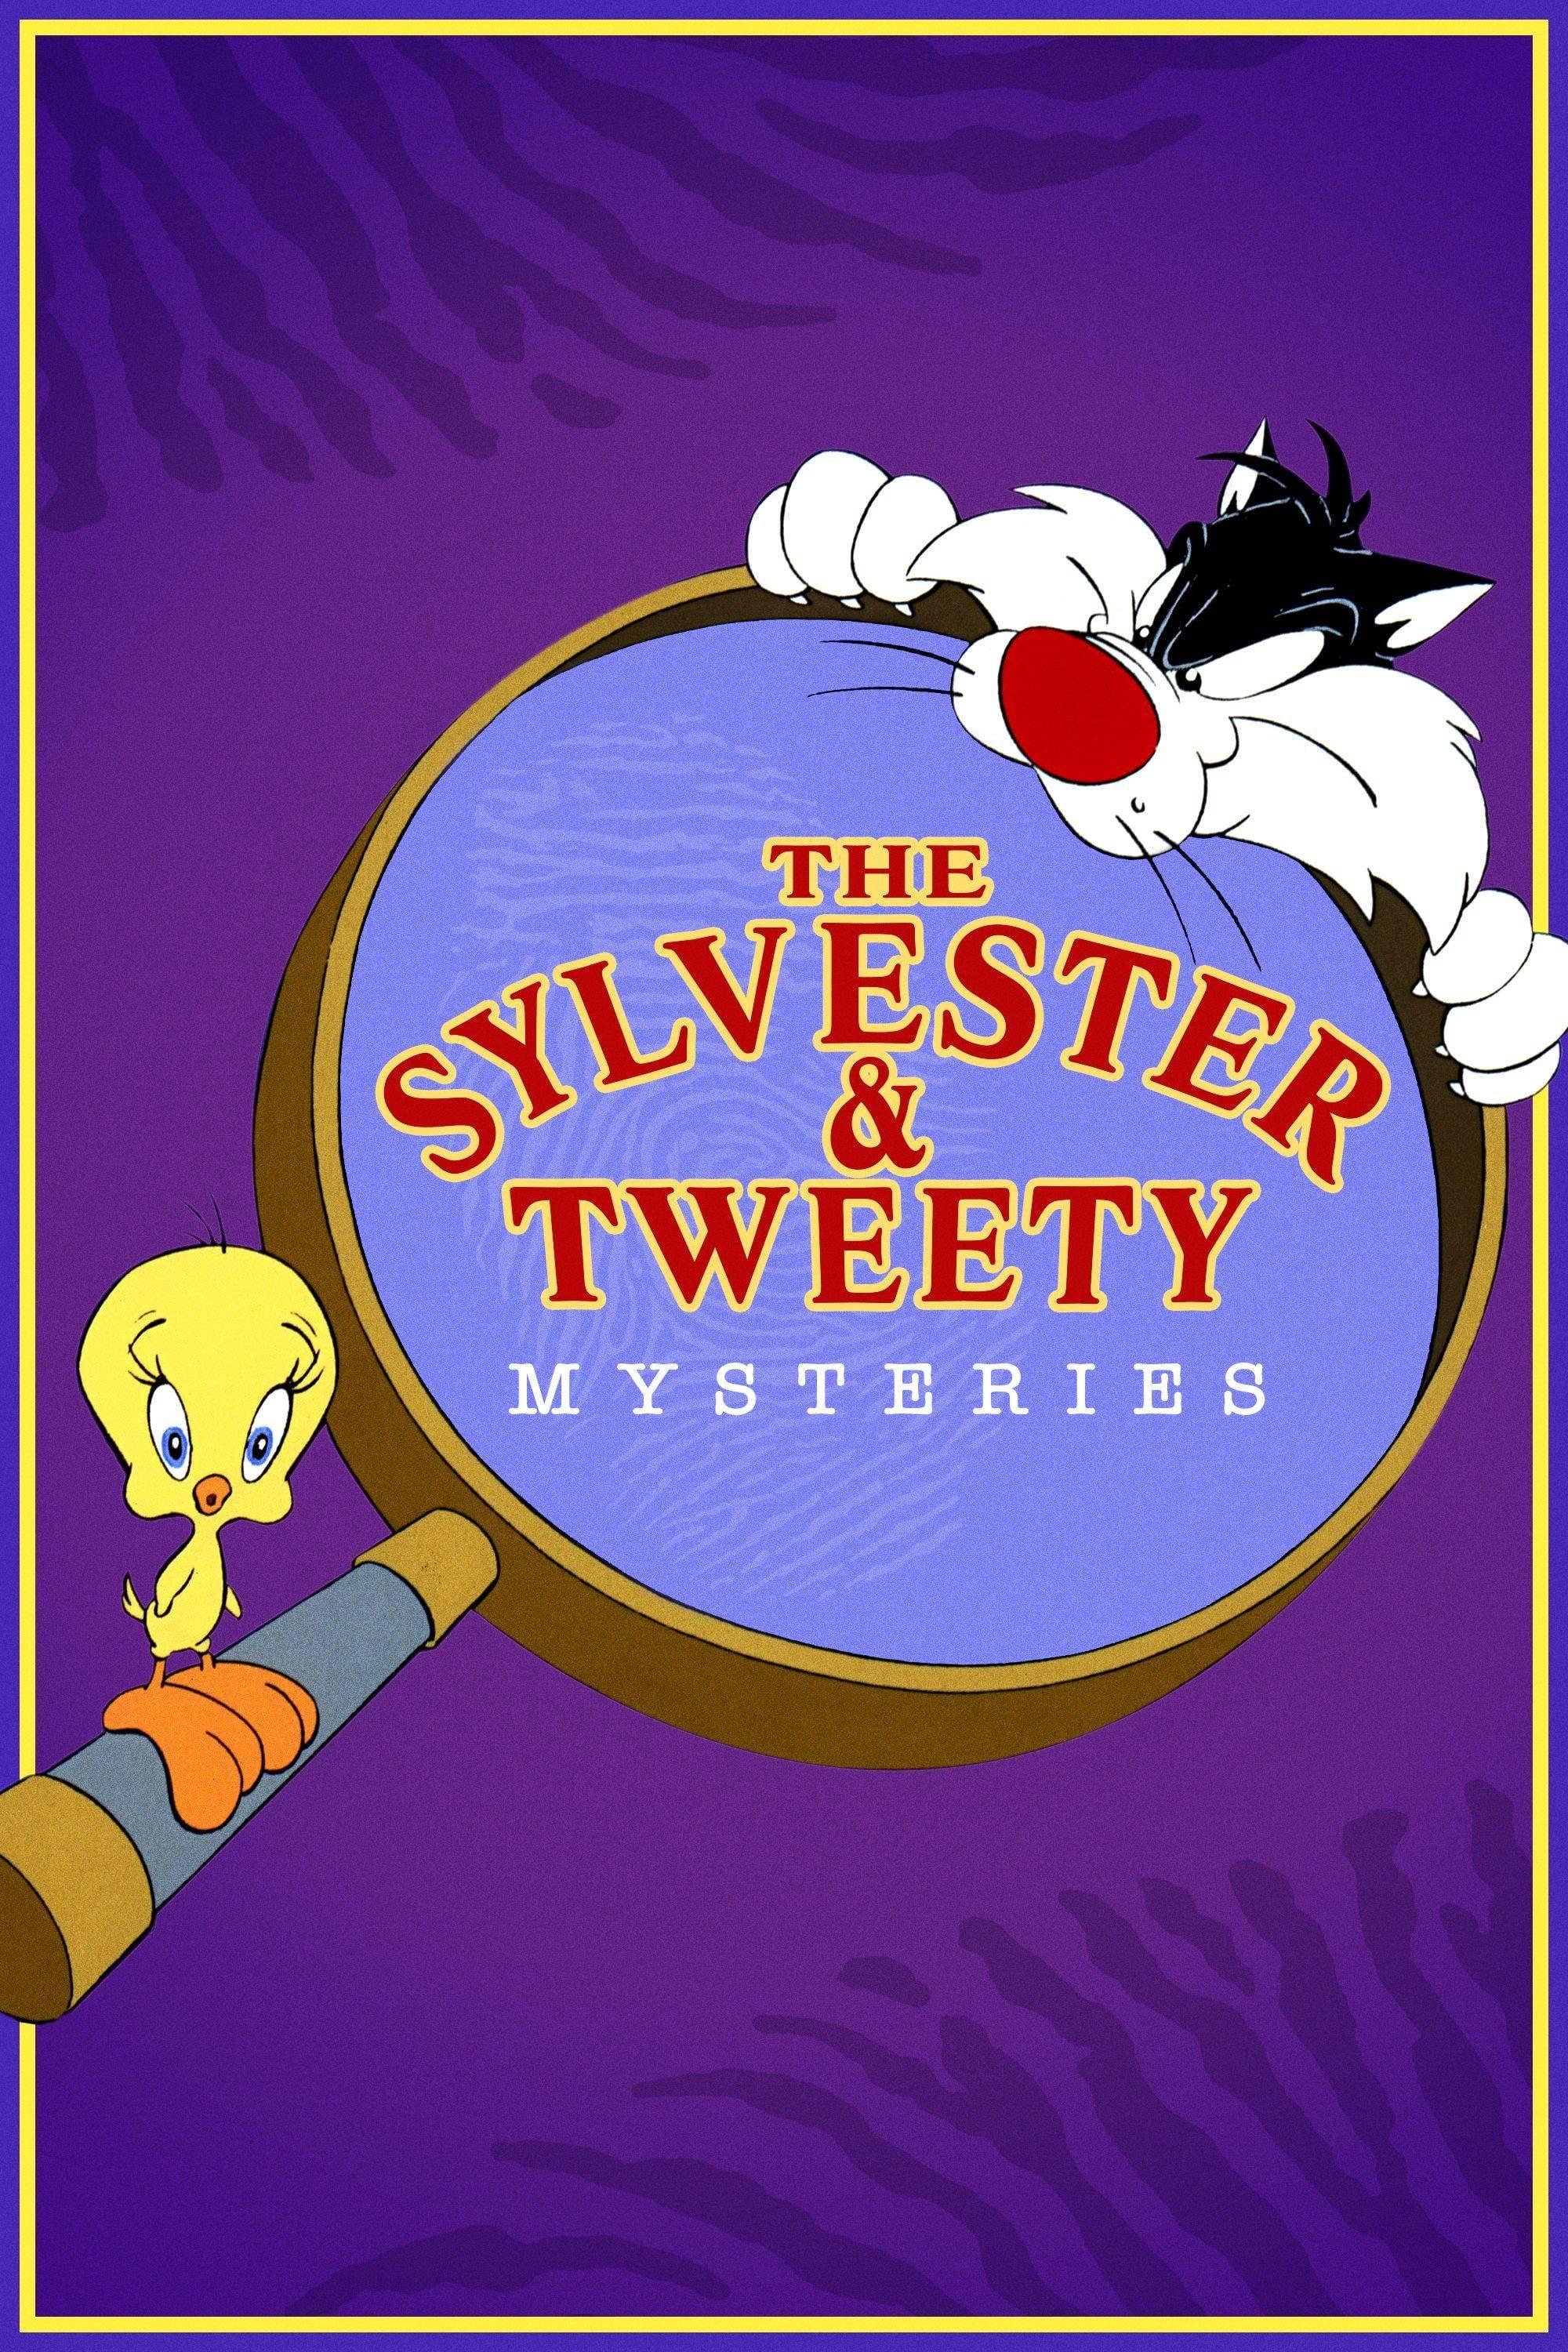 The Sylvester & Tweety Mysteries poster